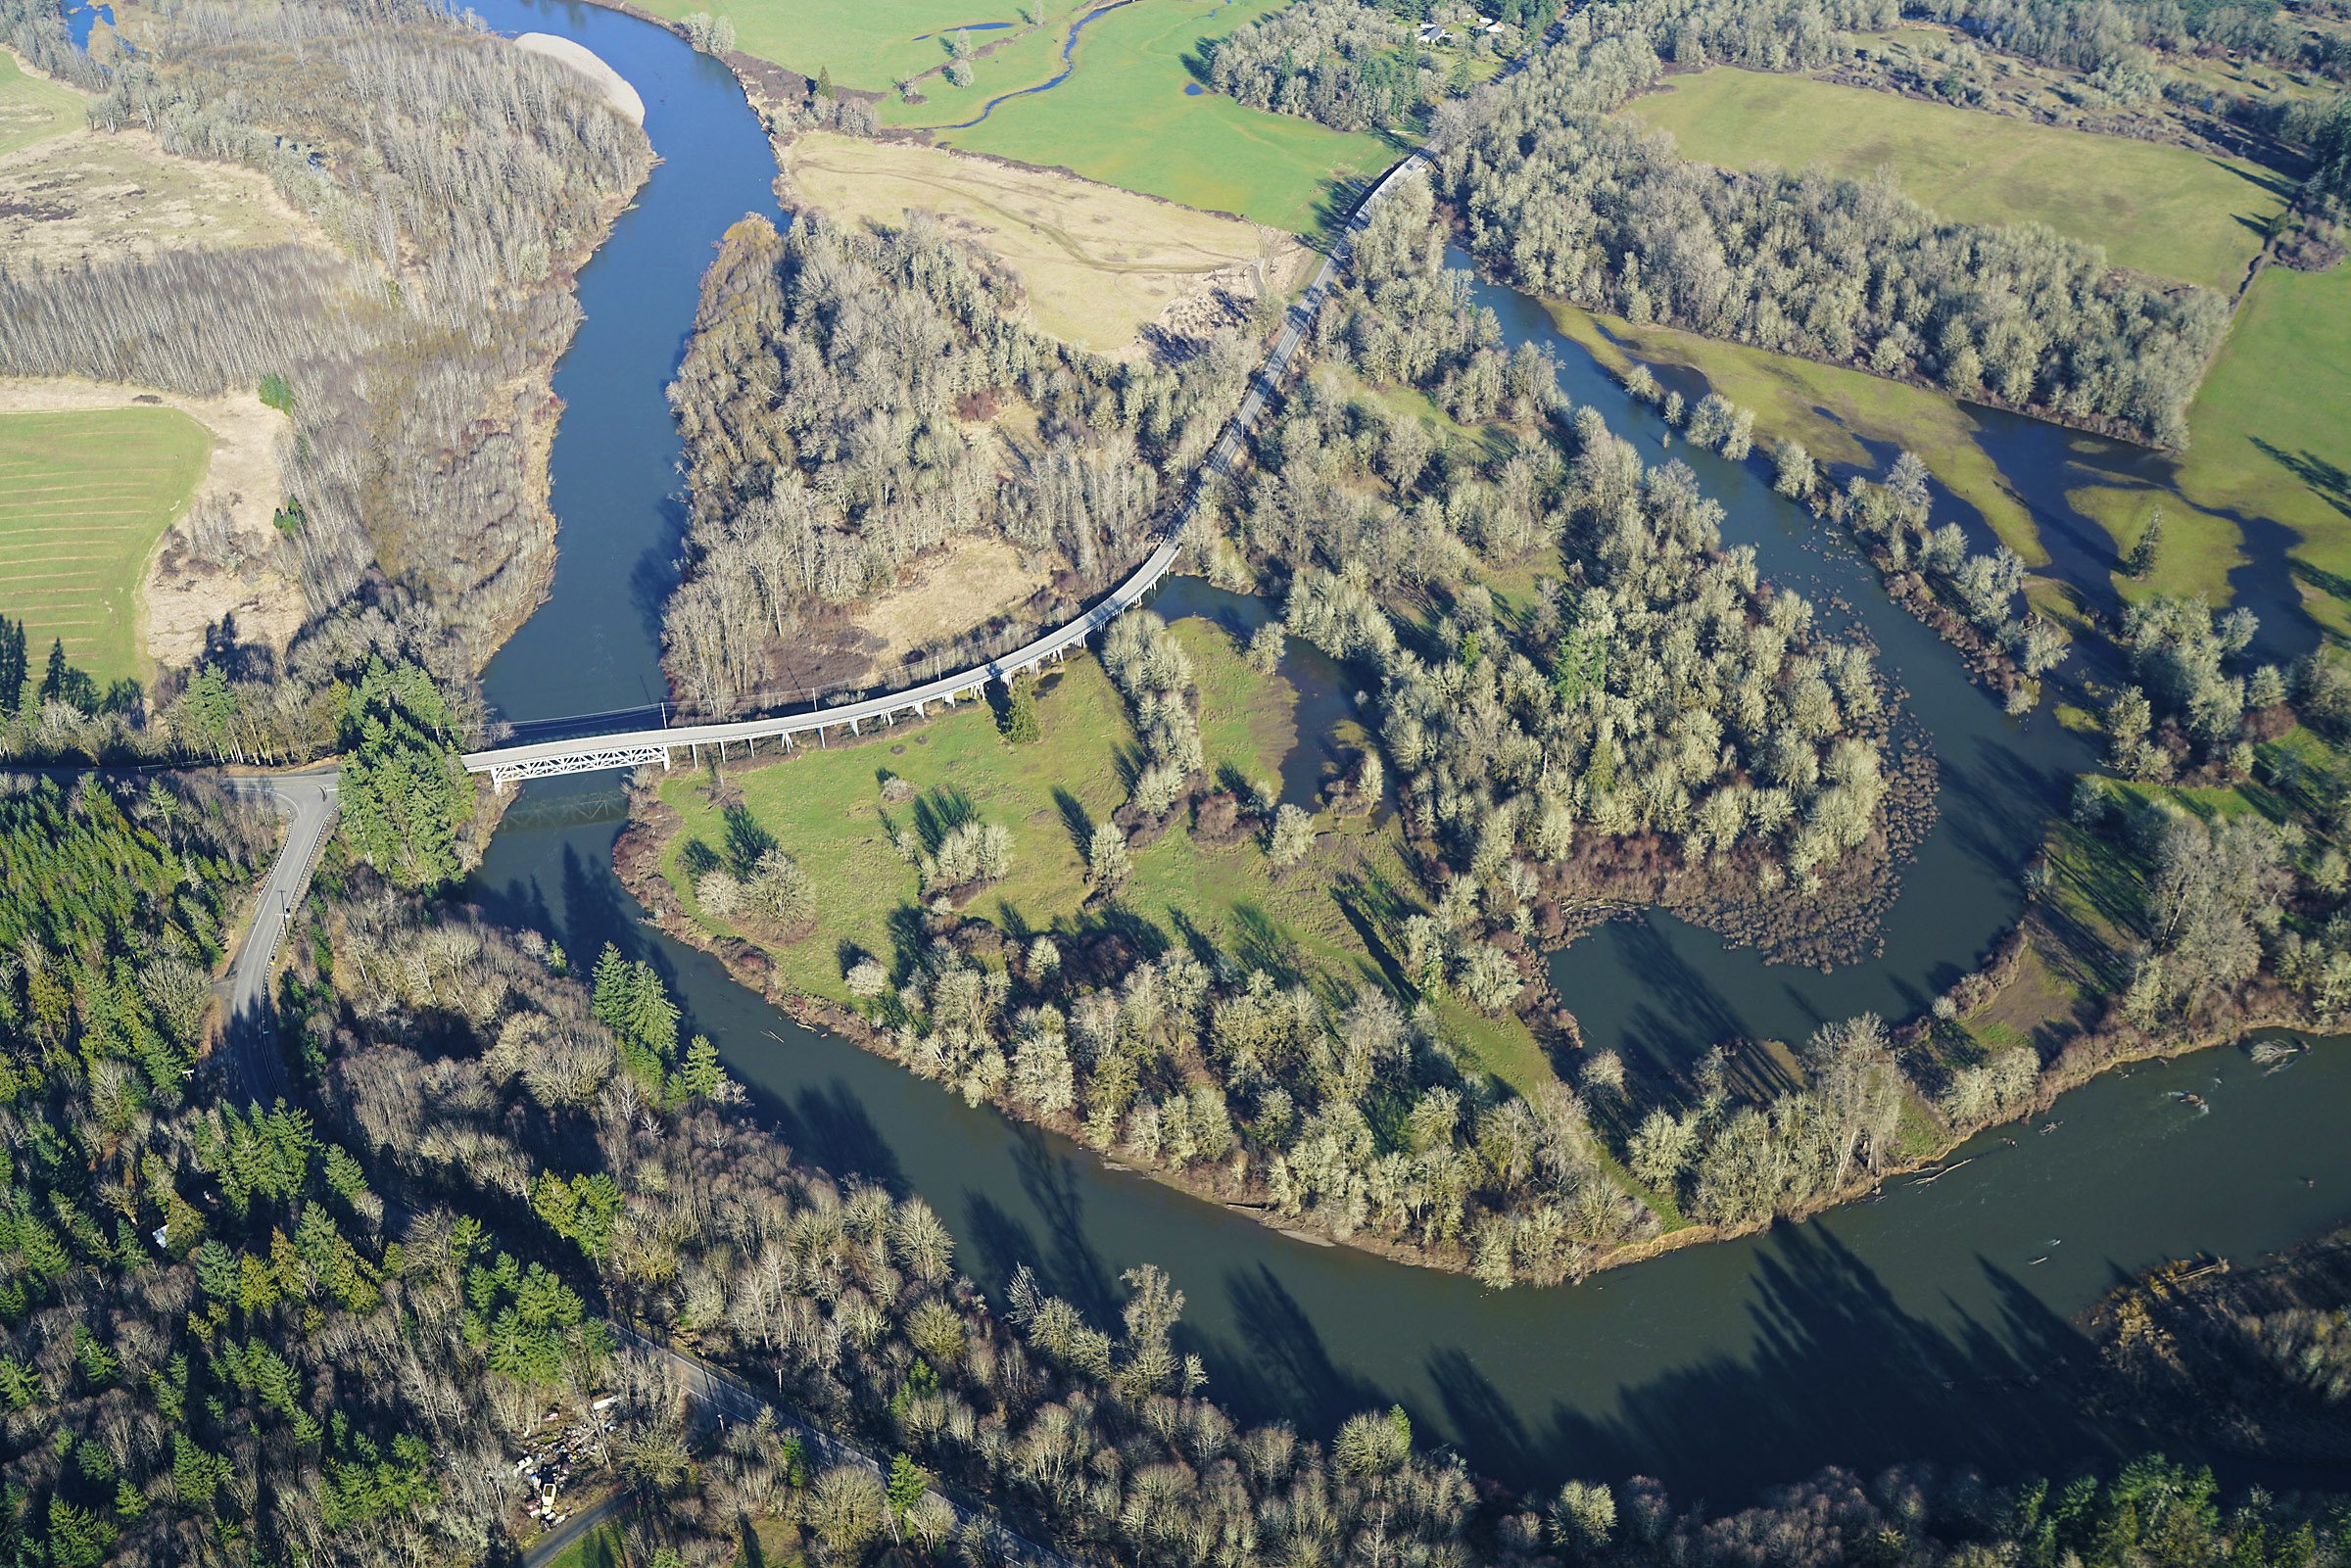 An aerial view of the Chehalis River showing an elevated roadway, trees, and wetlands.